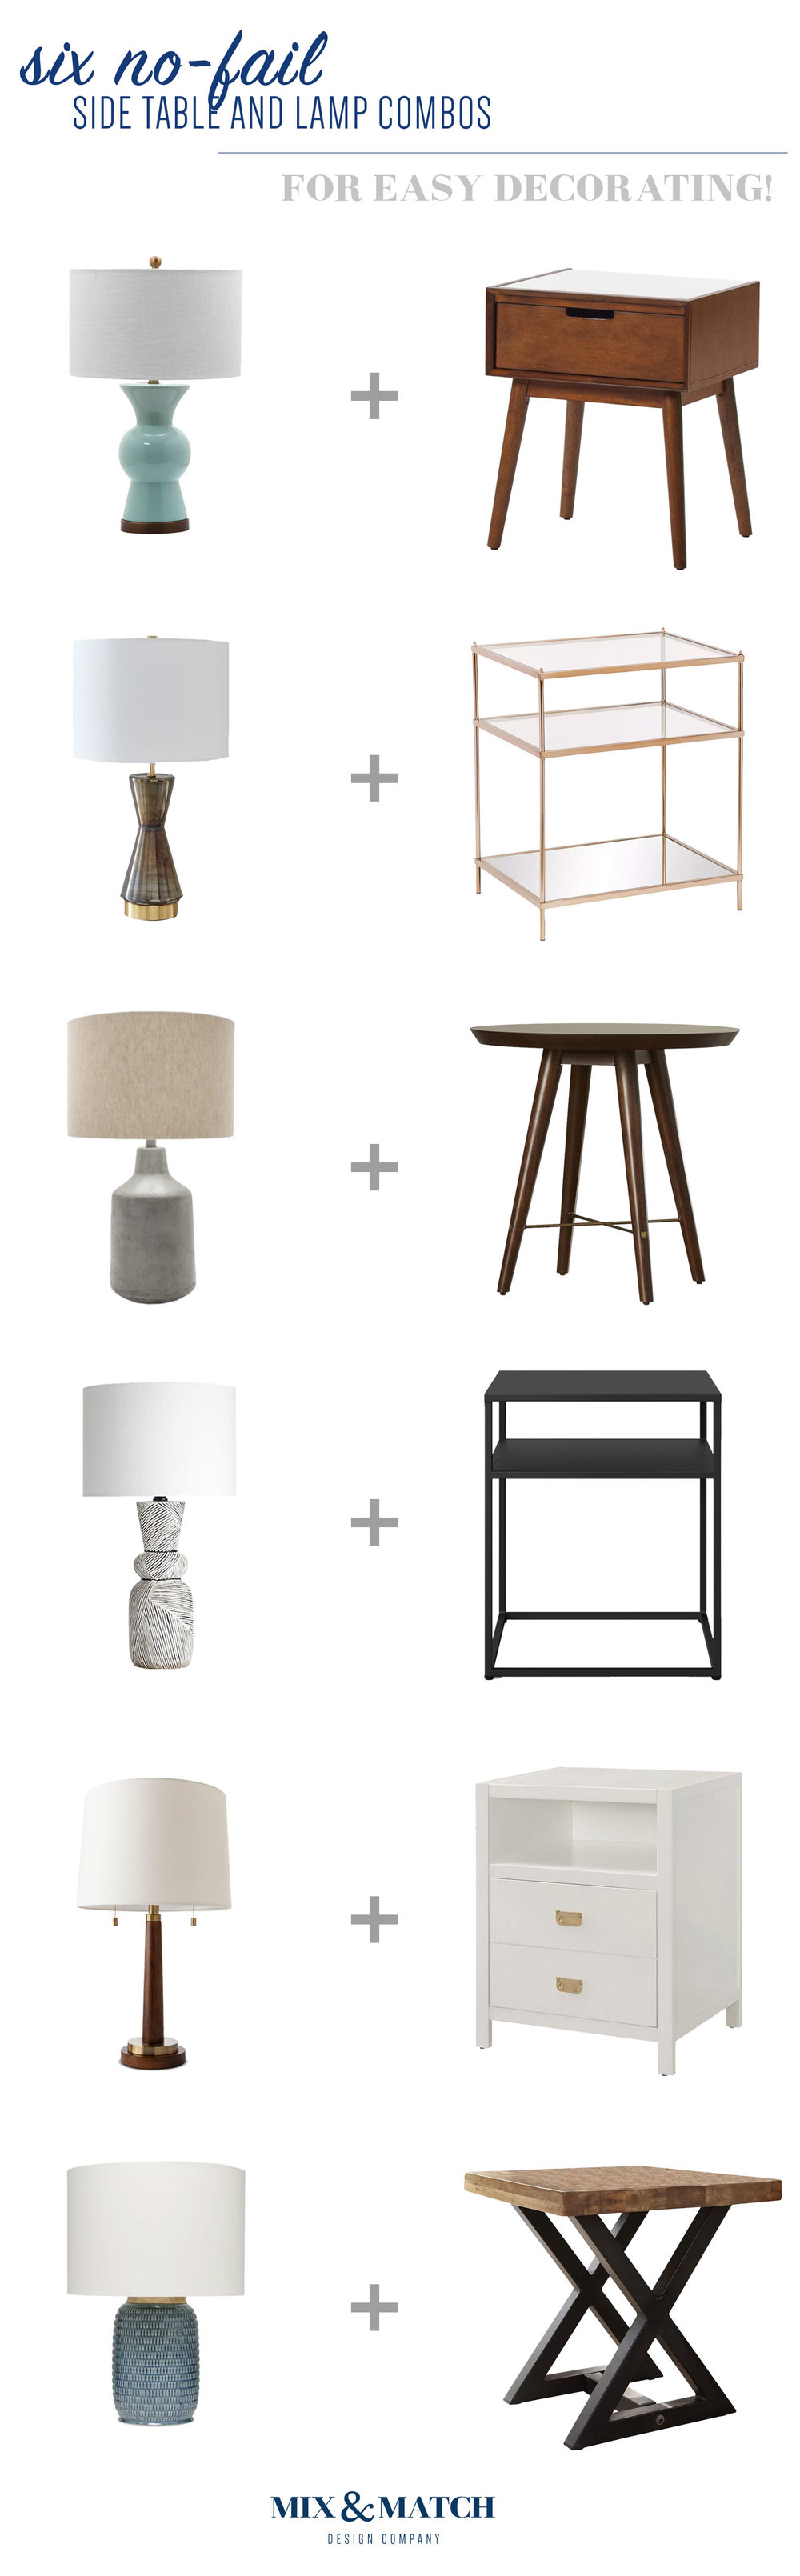 Side Table And Lamp Combo Plus, How To Mix And Match Table Lamps